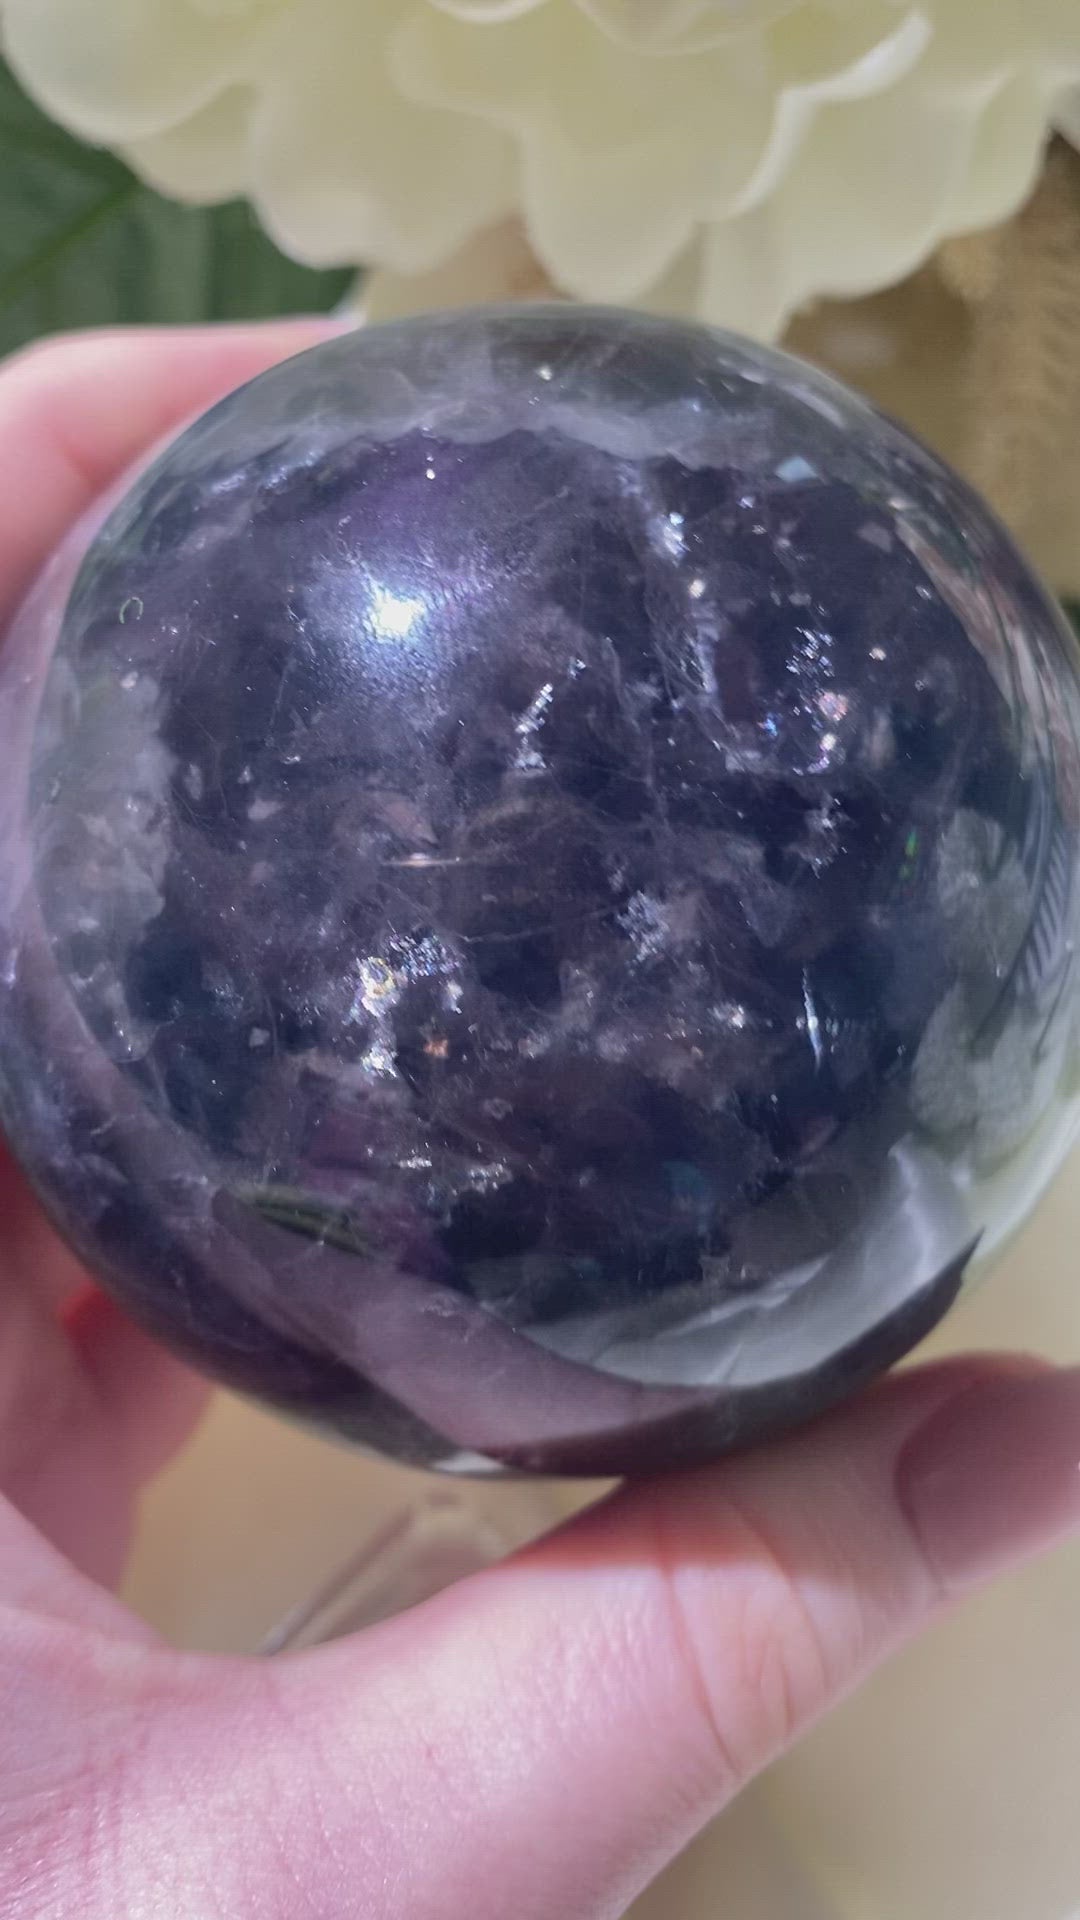 XL Rainbow Fluorite Sphere with Mica 1.65 lbs (A)